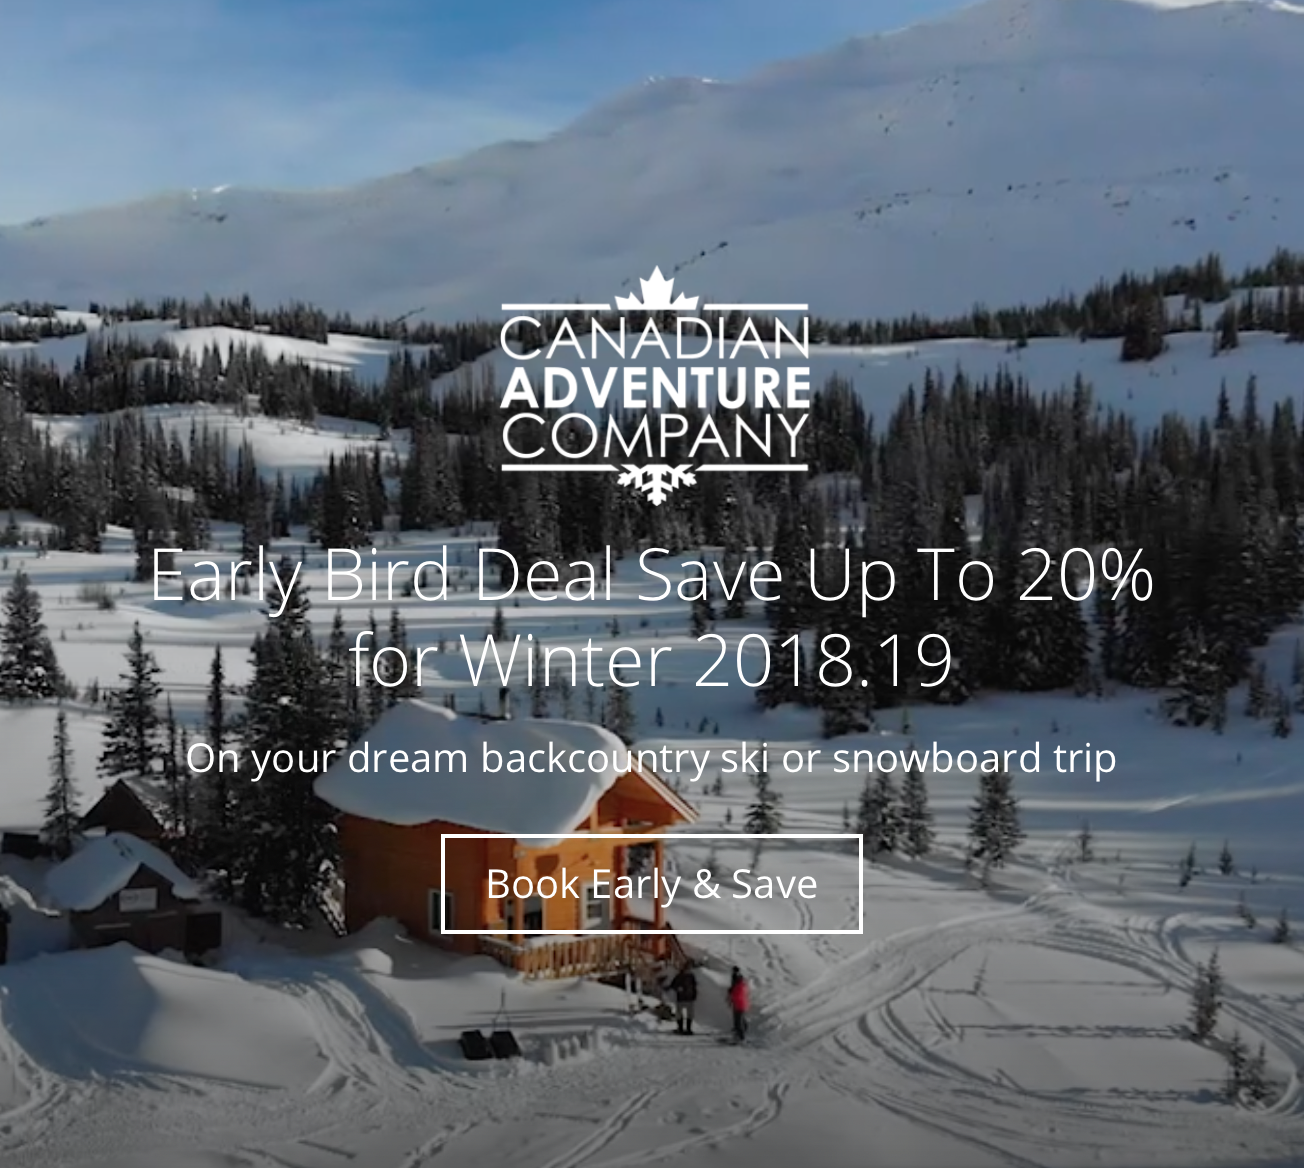 Canadian Adventure Company: Early Bird Deal Save Up To 20% for Winter 2018/19